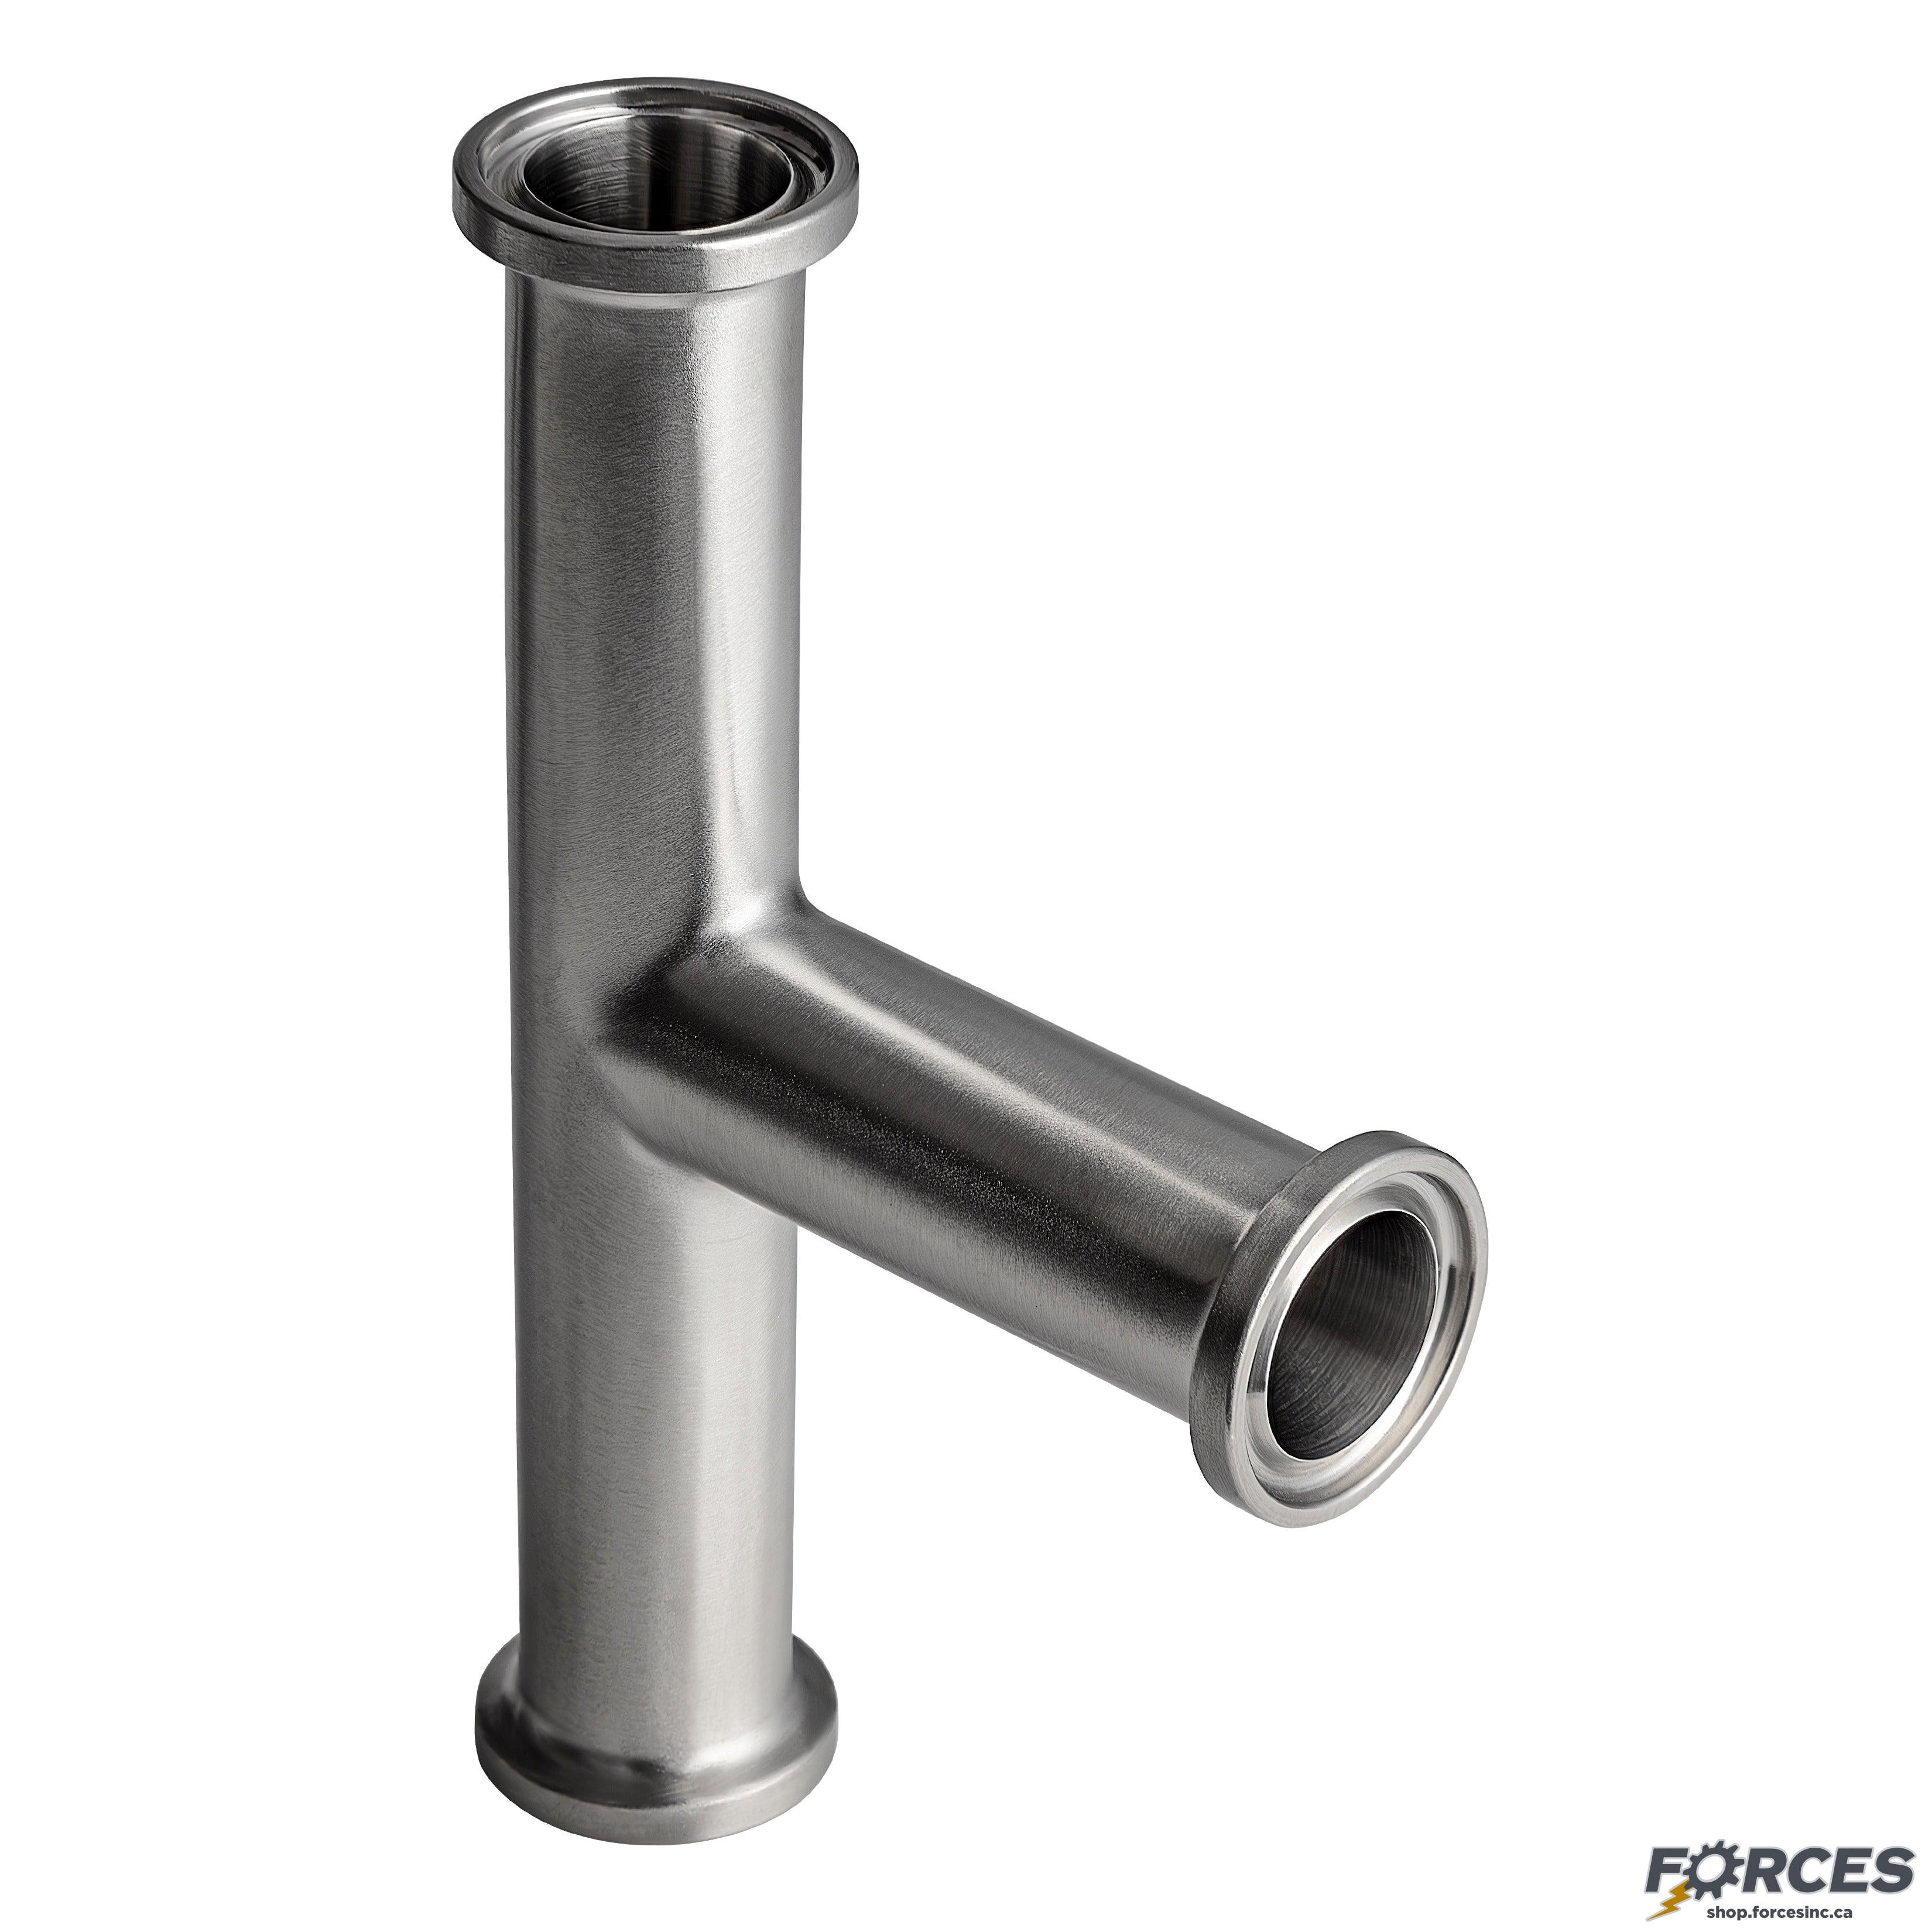 6" Tri-Clamp Tee - Stainless Steel 316 - Forces Inc